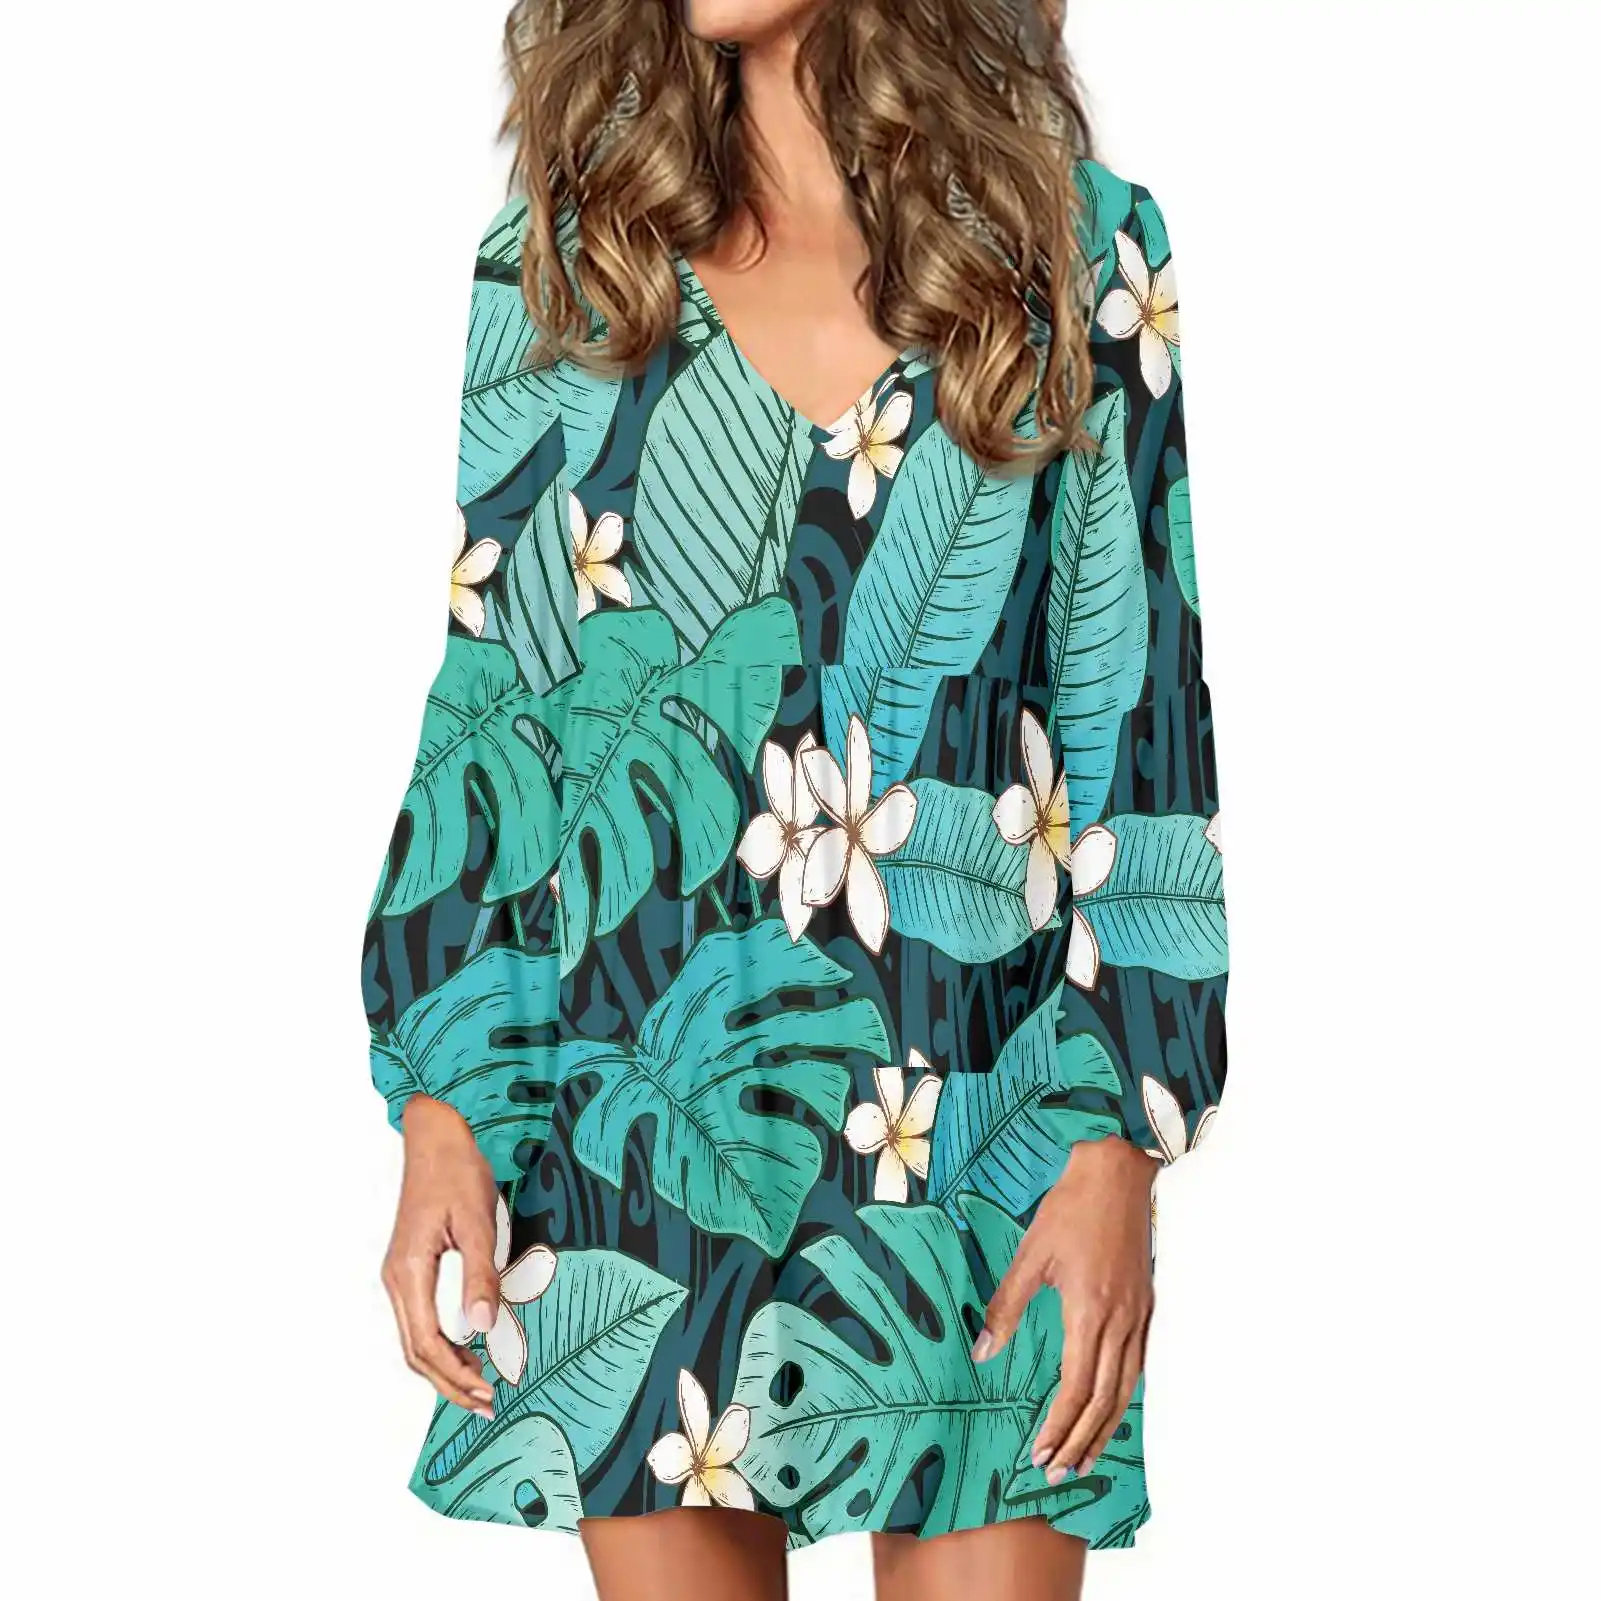 Ladies Dress Party Evening Polynesian Design With Leaf Flowers Tattoo Print Tunic Dresses Casual Loose Babydoll Mini Short Dress